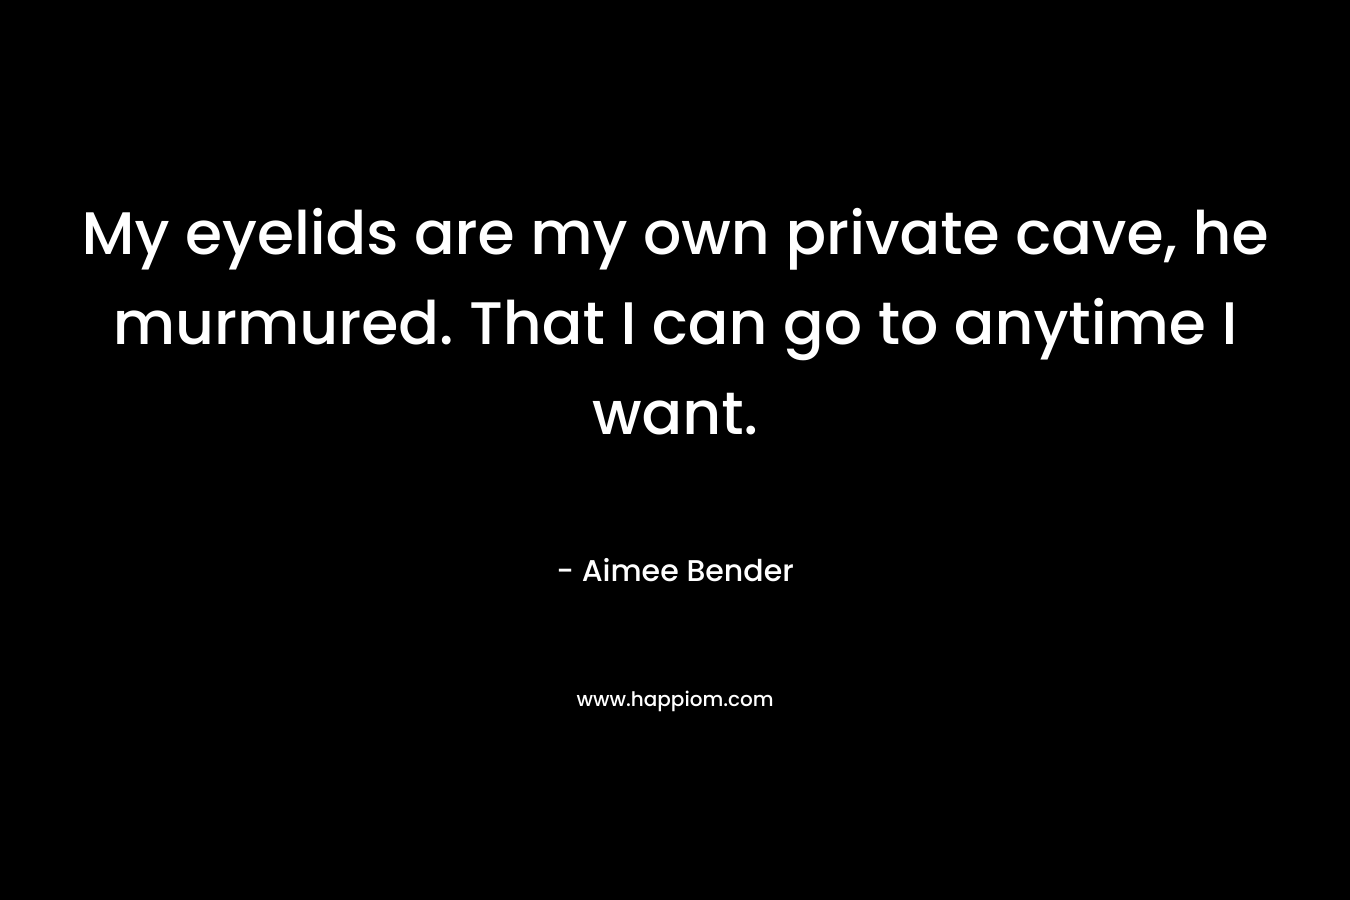 My eyelids are my own private cave, he murmured. That I can go to anytime I want. – Aimee Bender